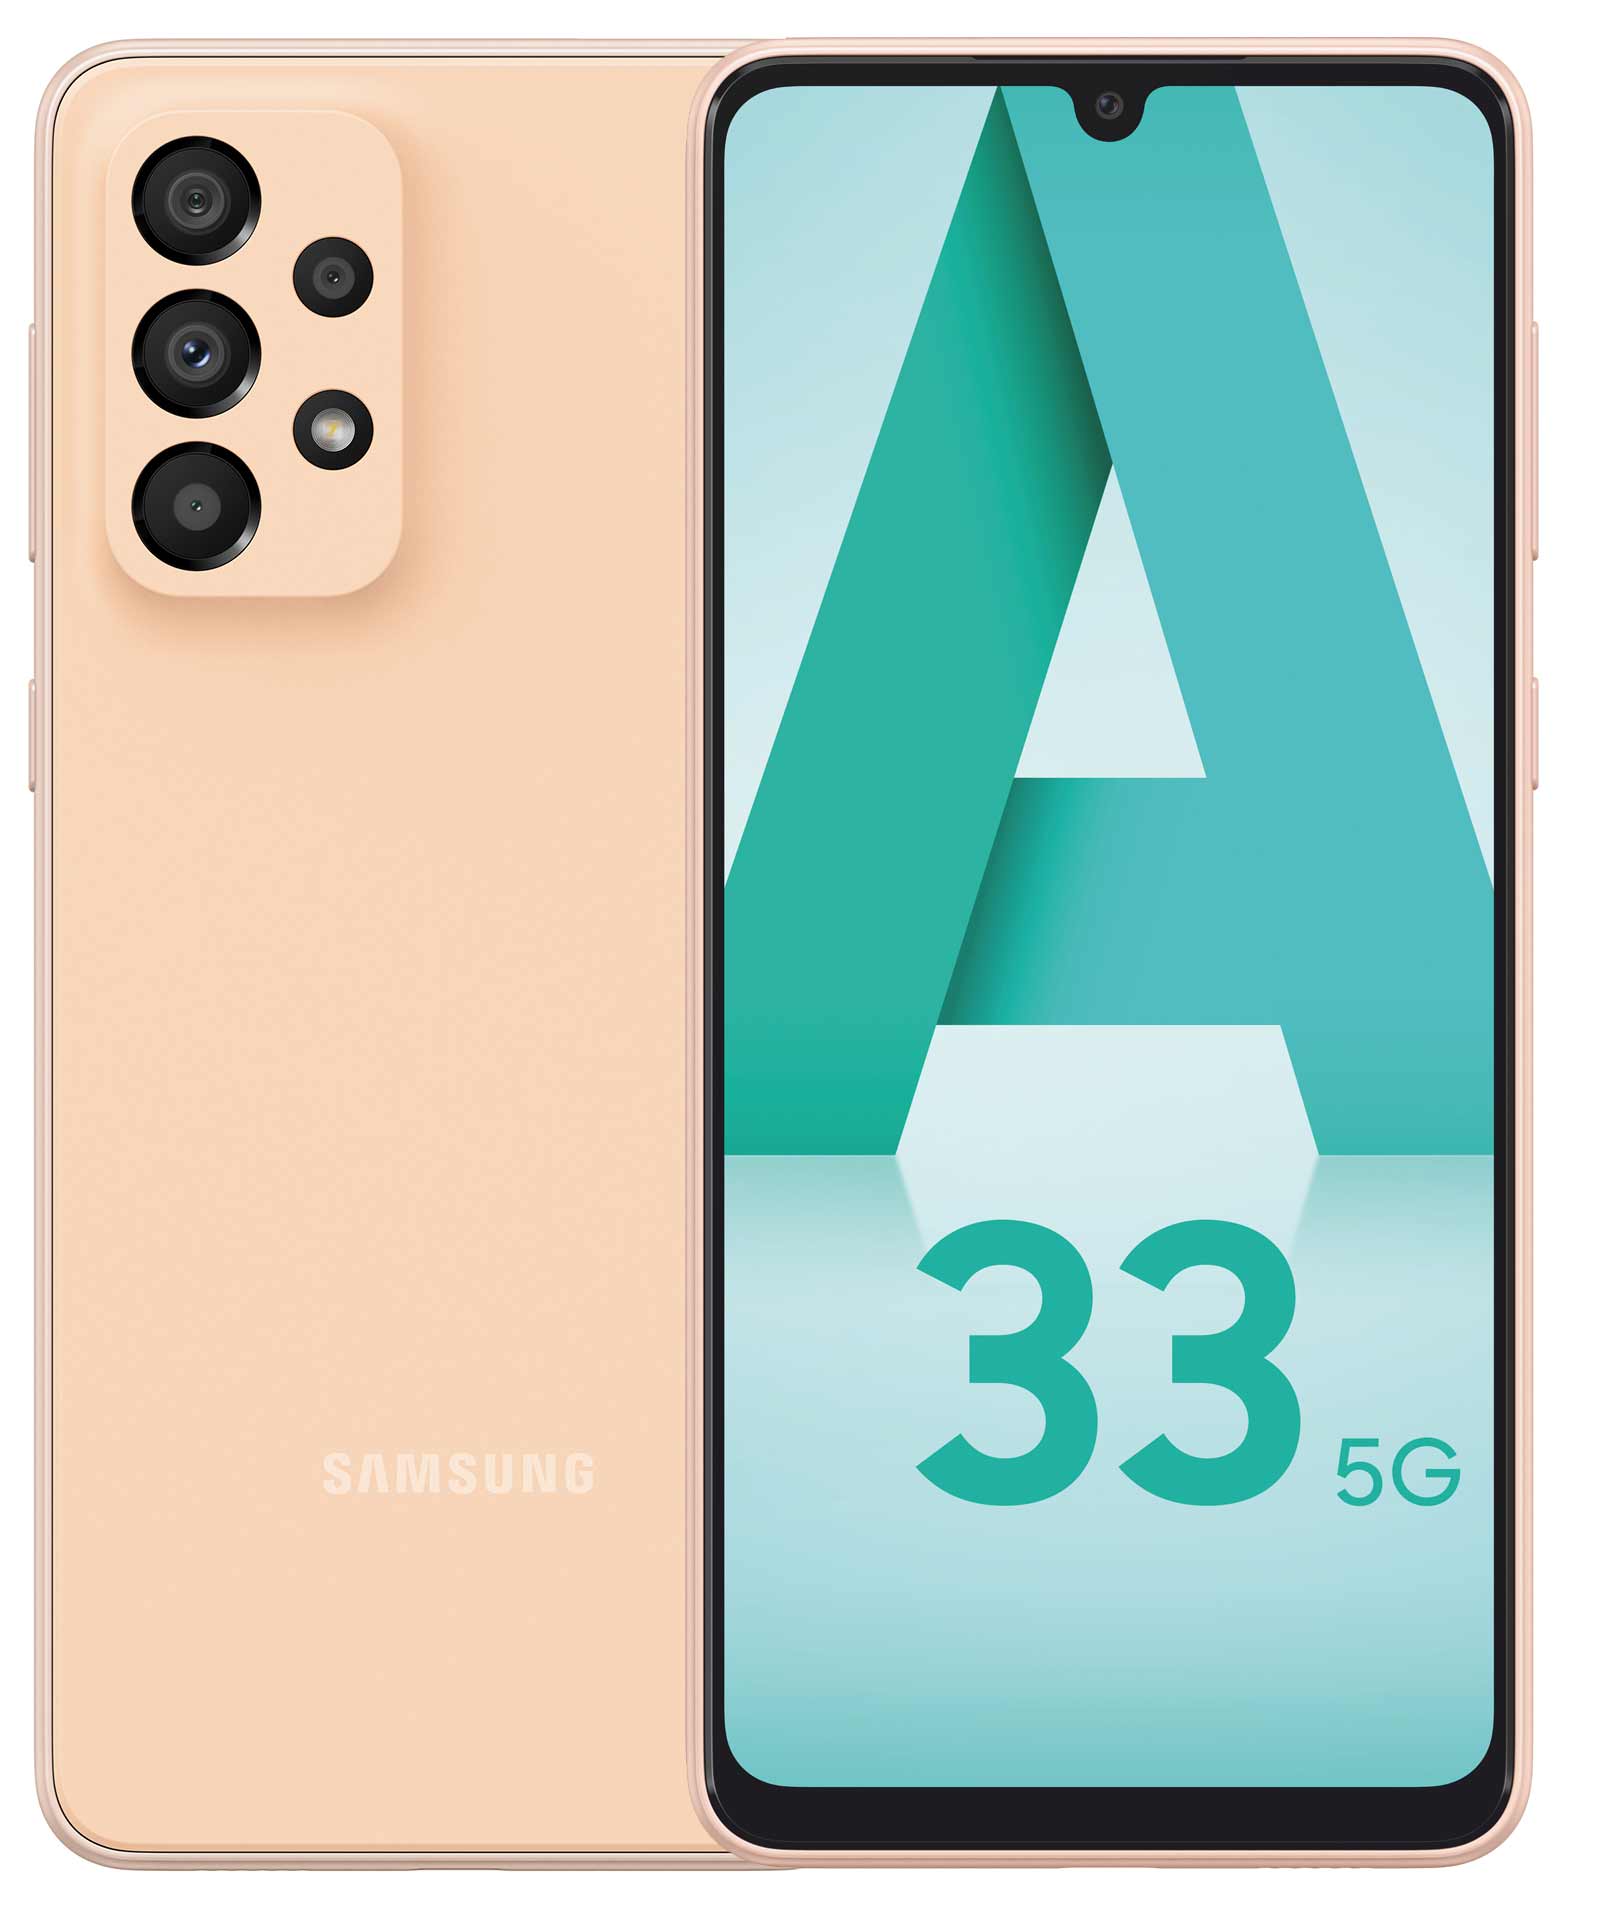 Here's the official Galaxy A33 price and release date - SamMobile